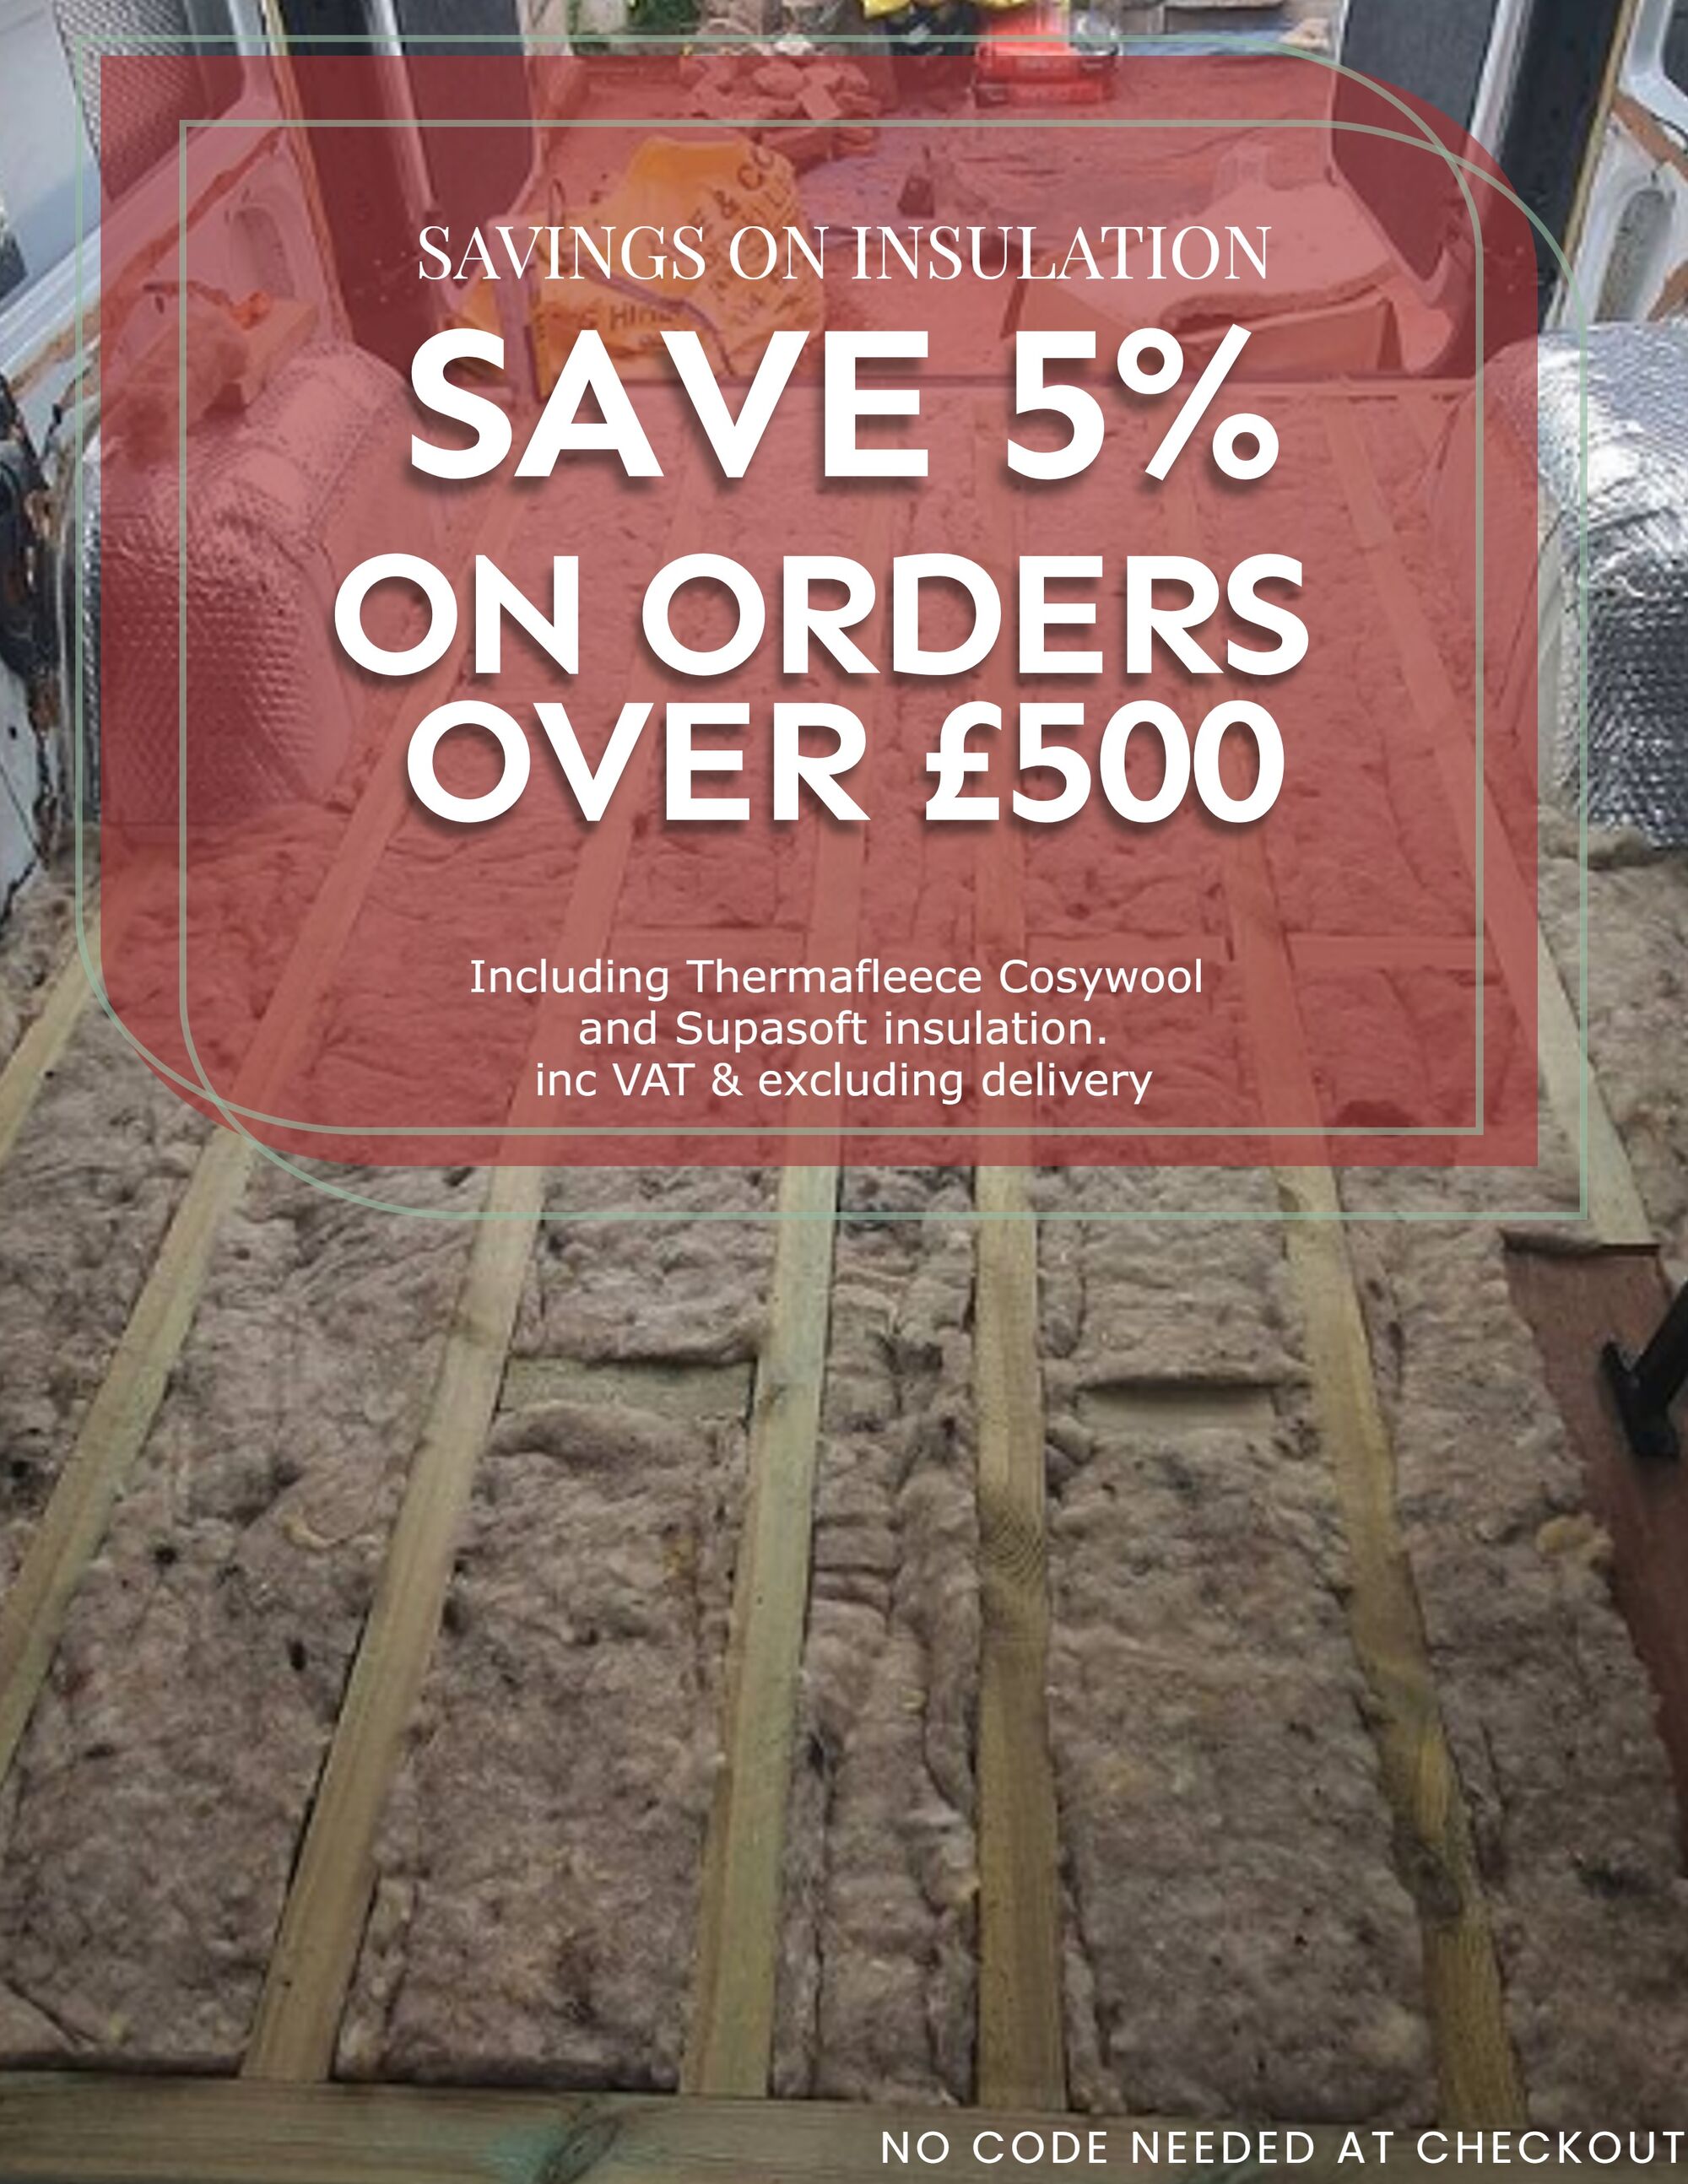 Save 5% on orders over £500